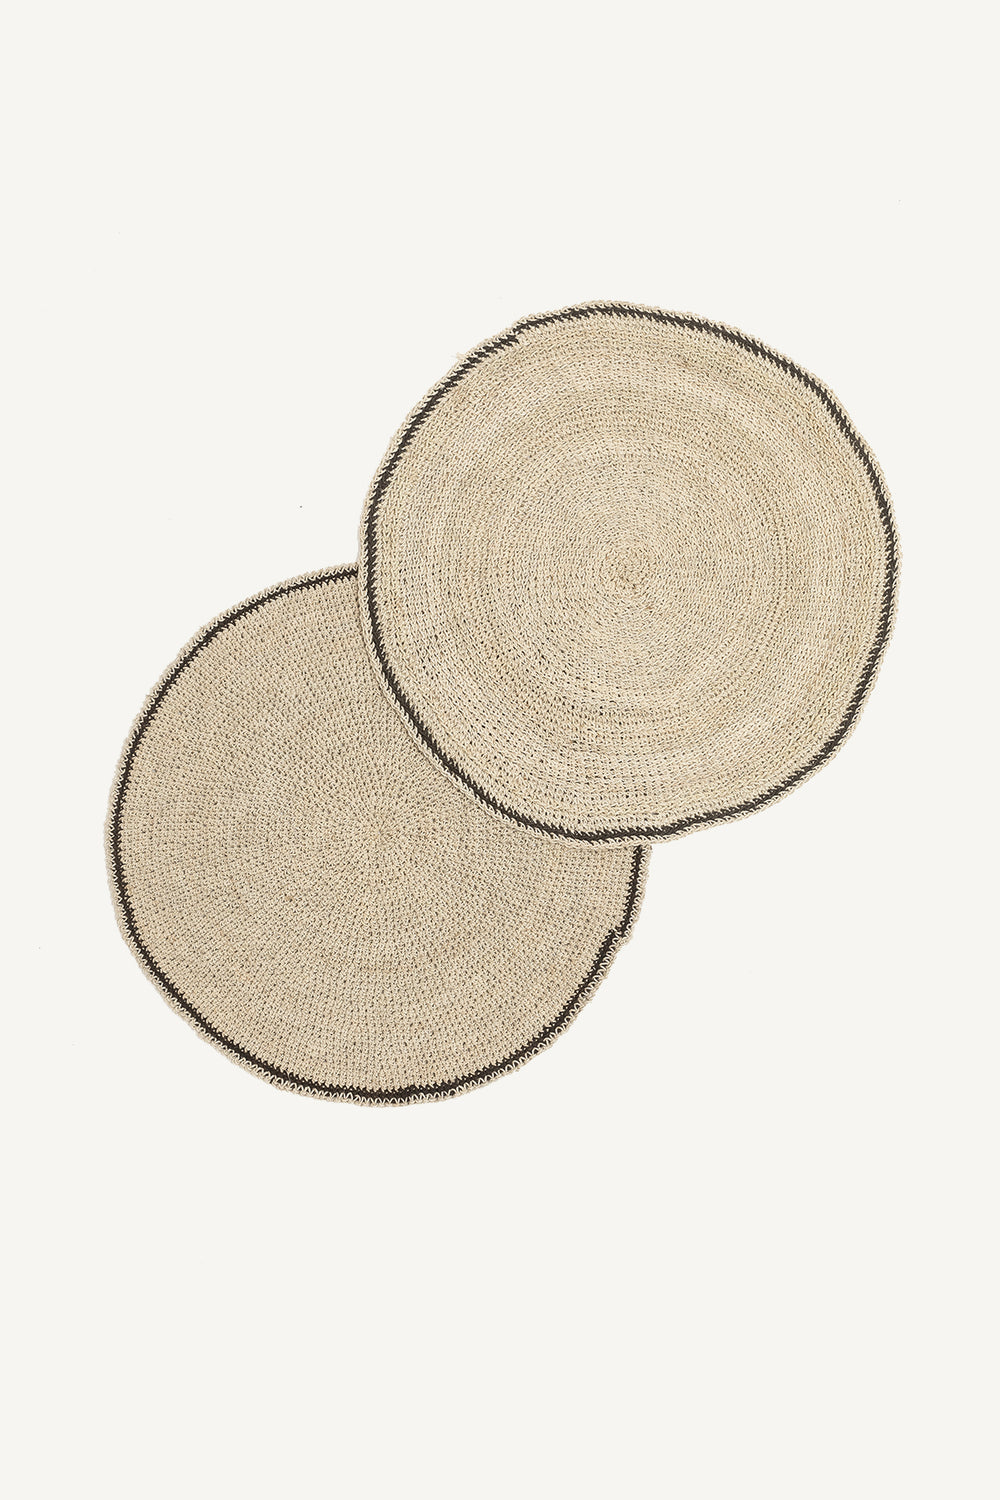 Hand Matters. Round chaguar placemats